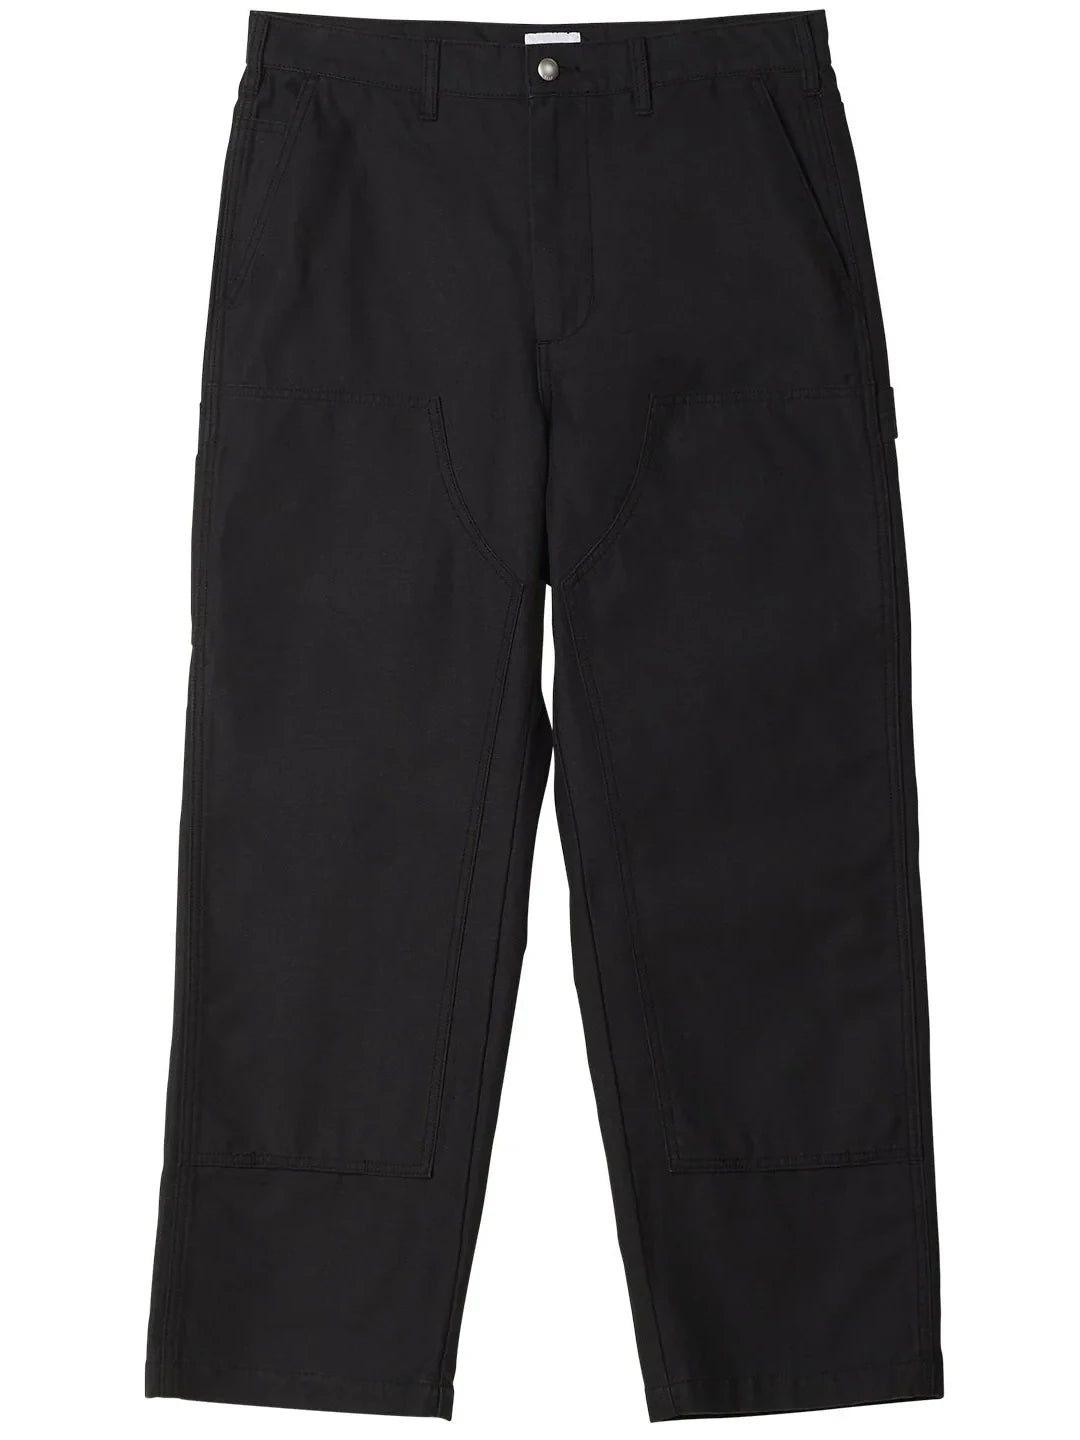 OBEY BIG TIMER TWILL DOUBLE KNEE PANT BLACK